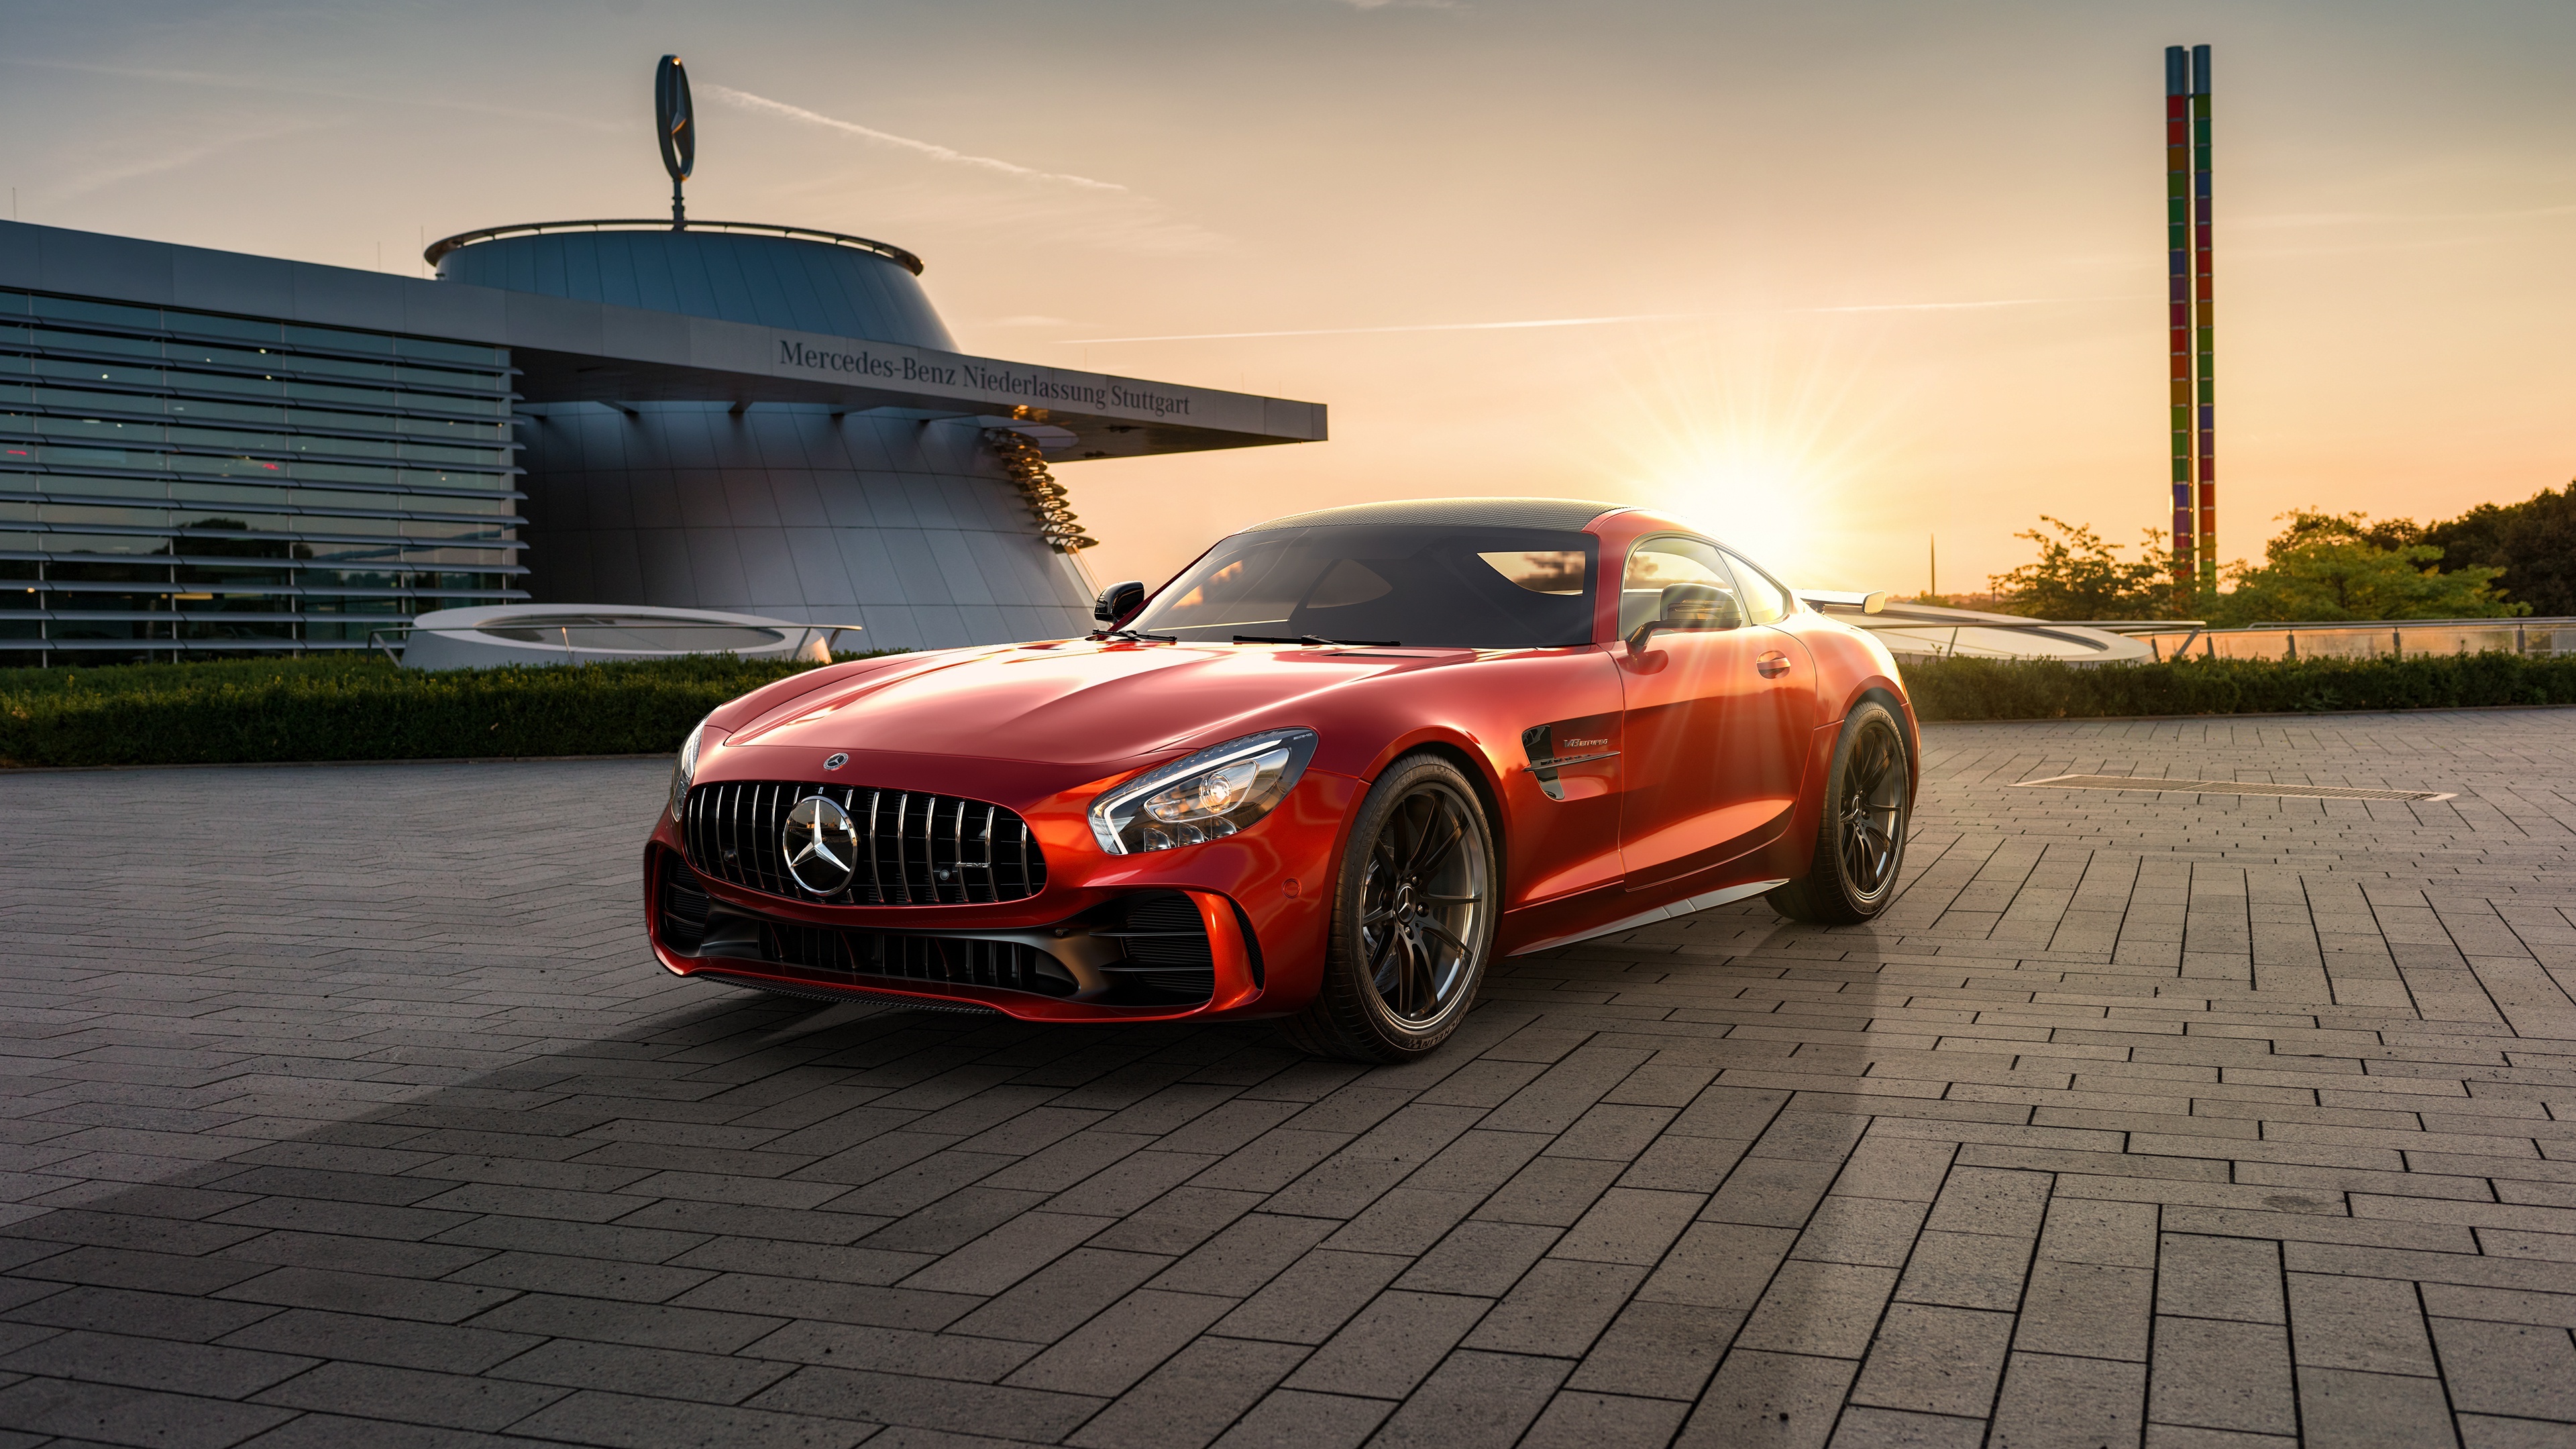 Mercedes-Benz AMG GT, Thunderous power, Striking appearance, Unmatched speed, 3840x2160 4K Desktop